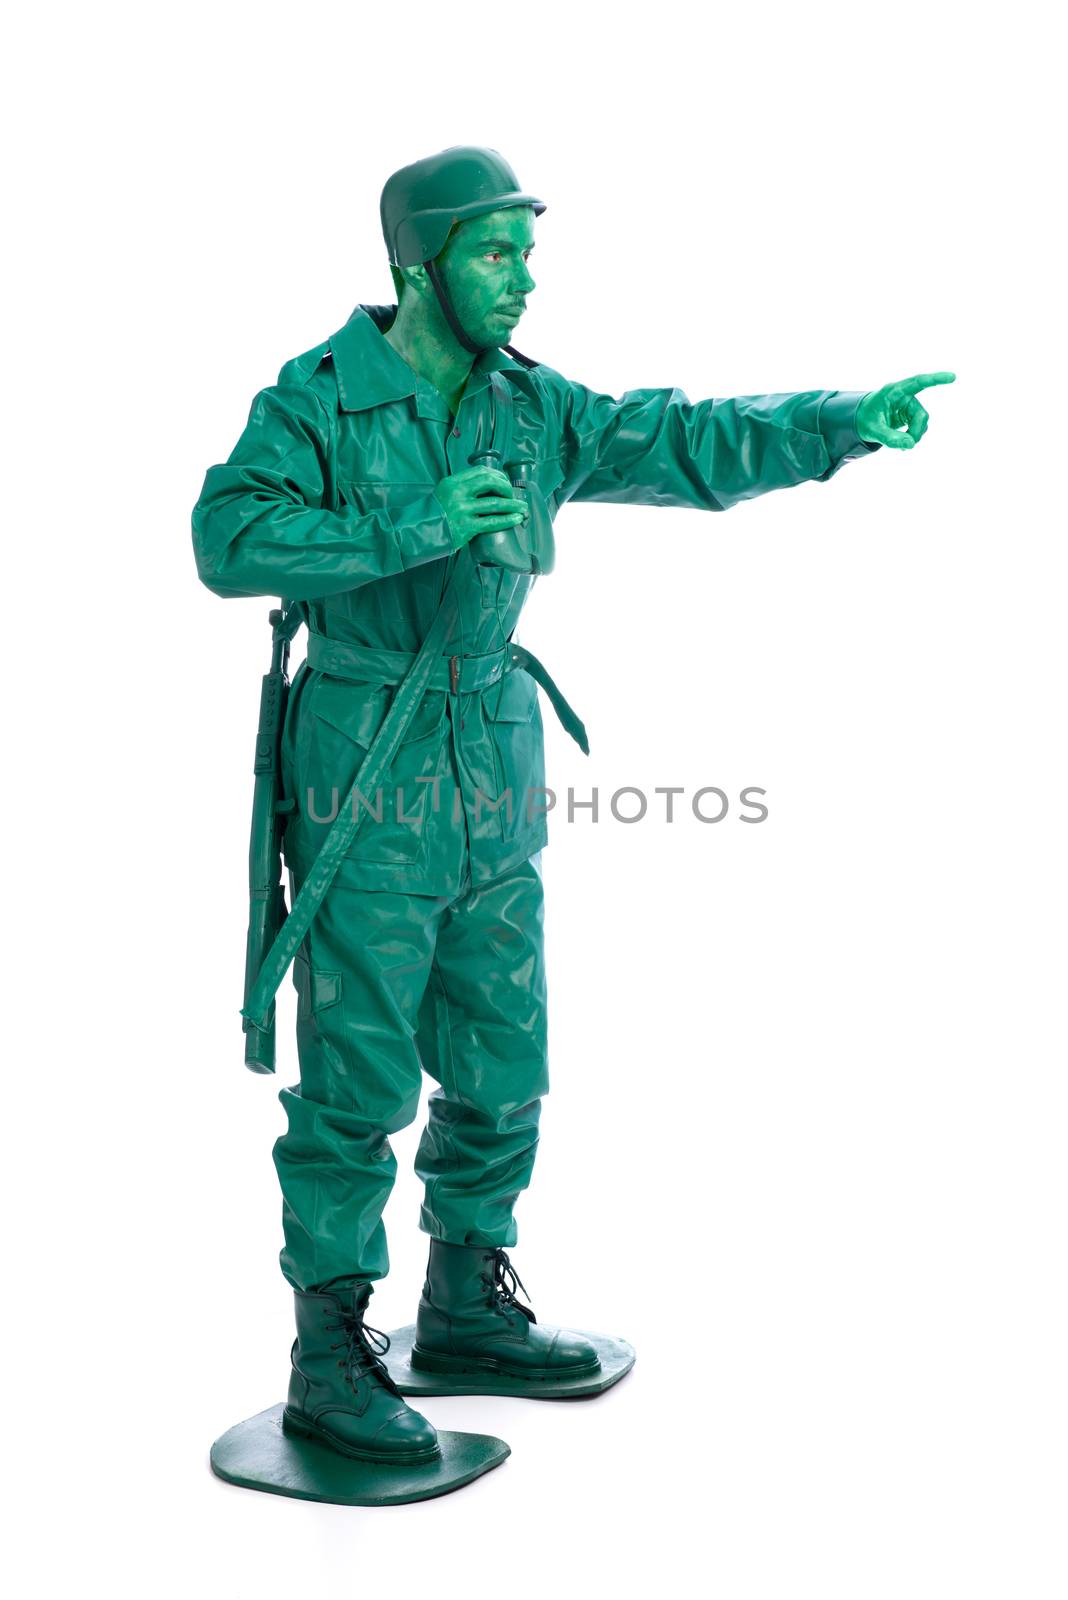 Man on a green toy soldier costume with riffle poiting with his forefinger  isolated on white background.